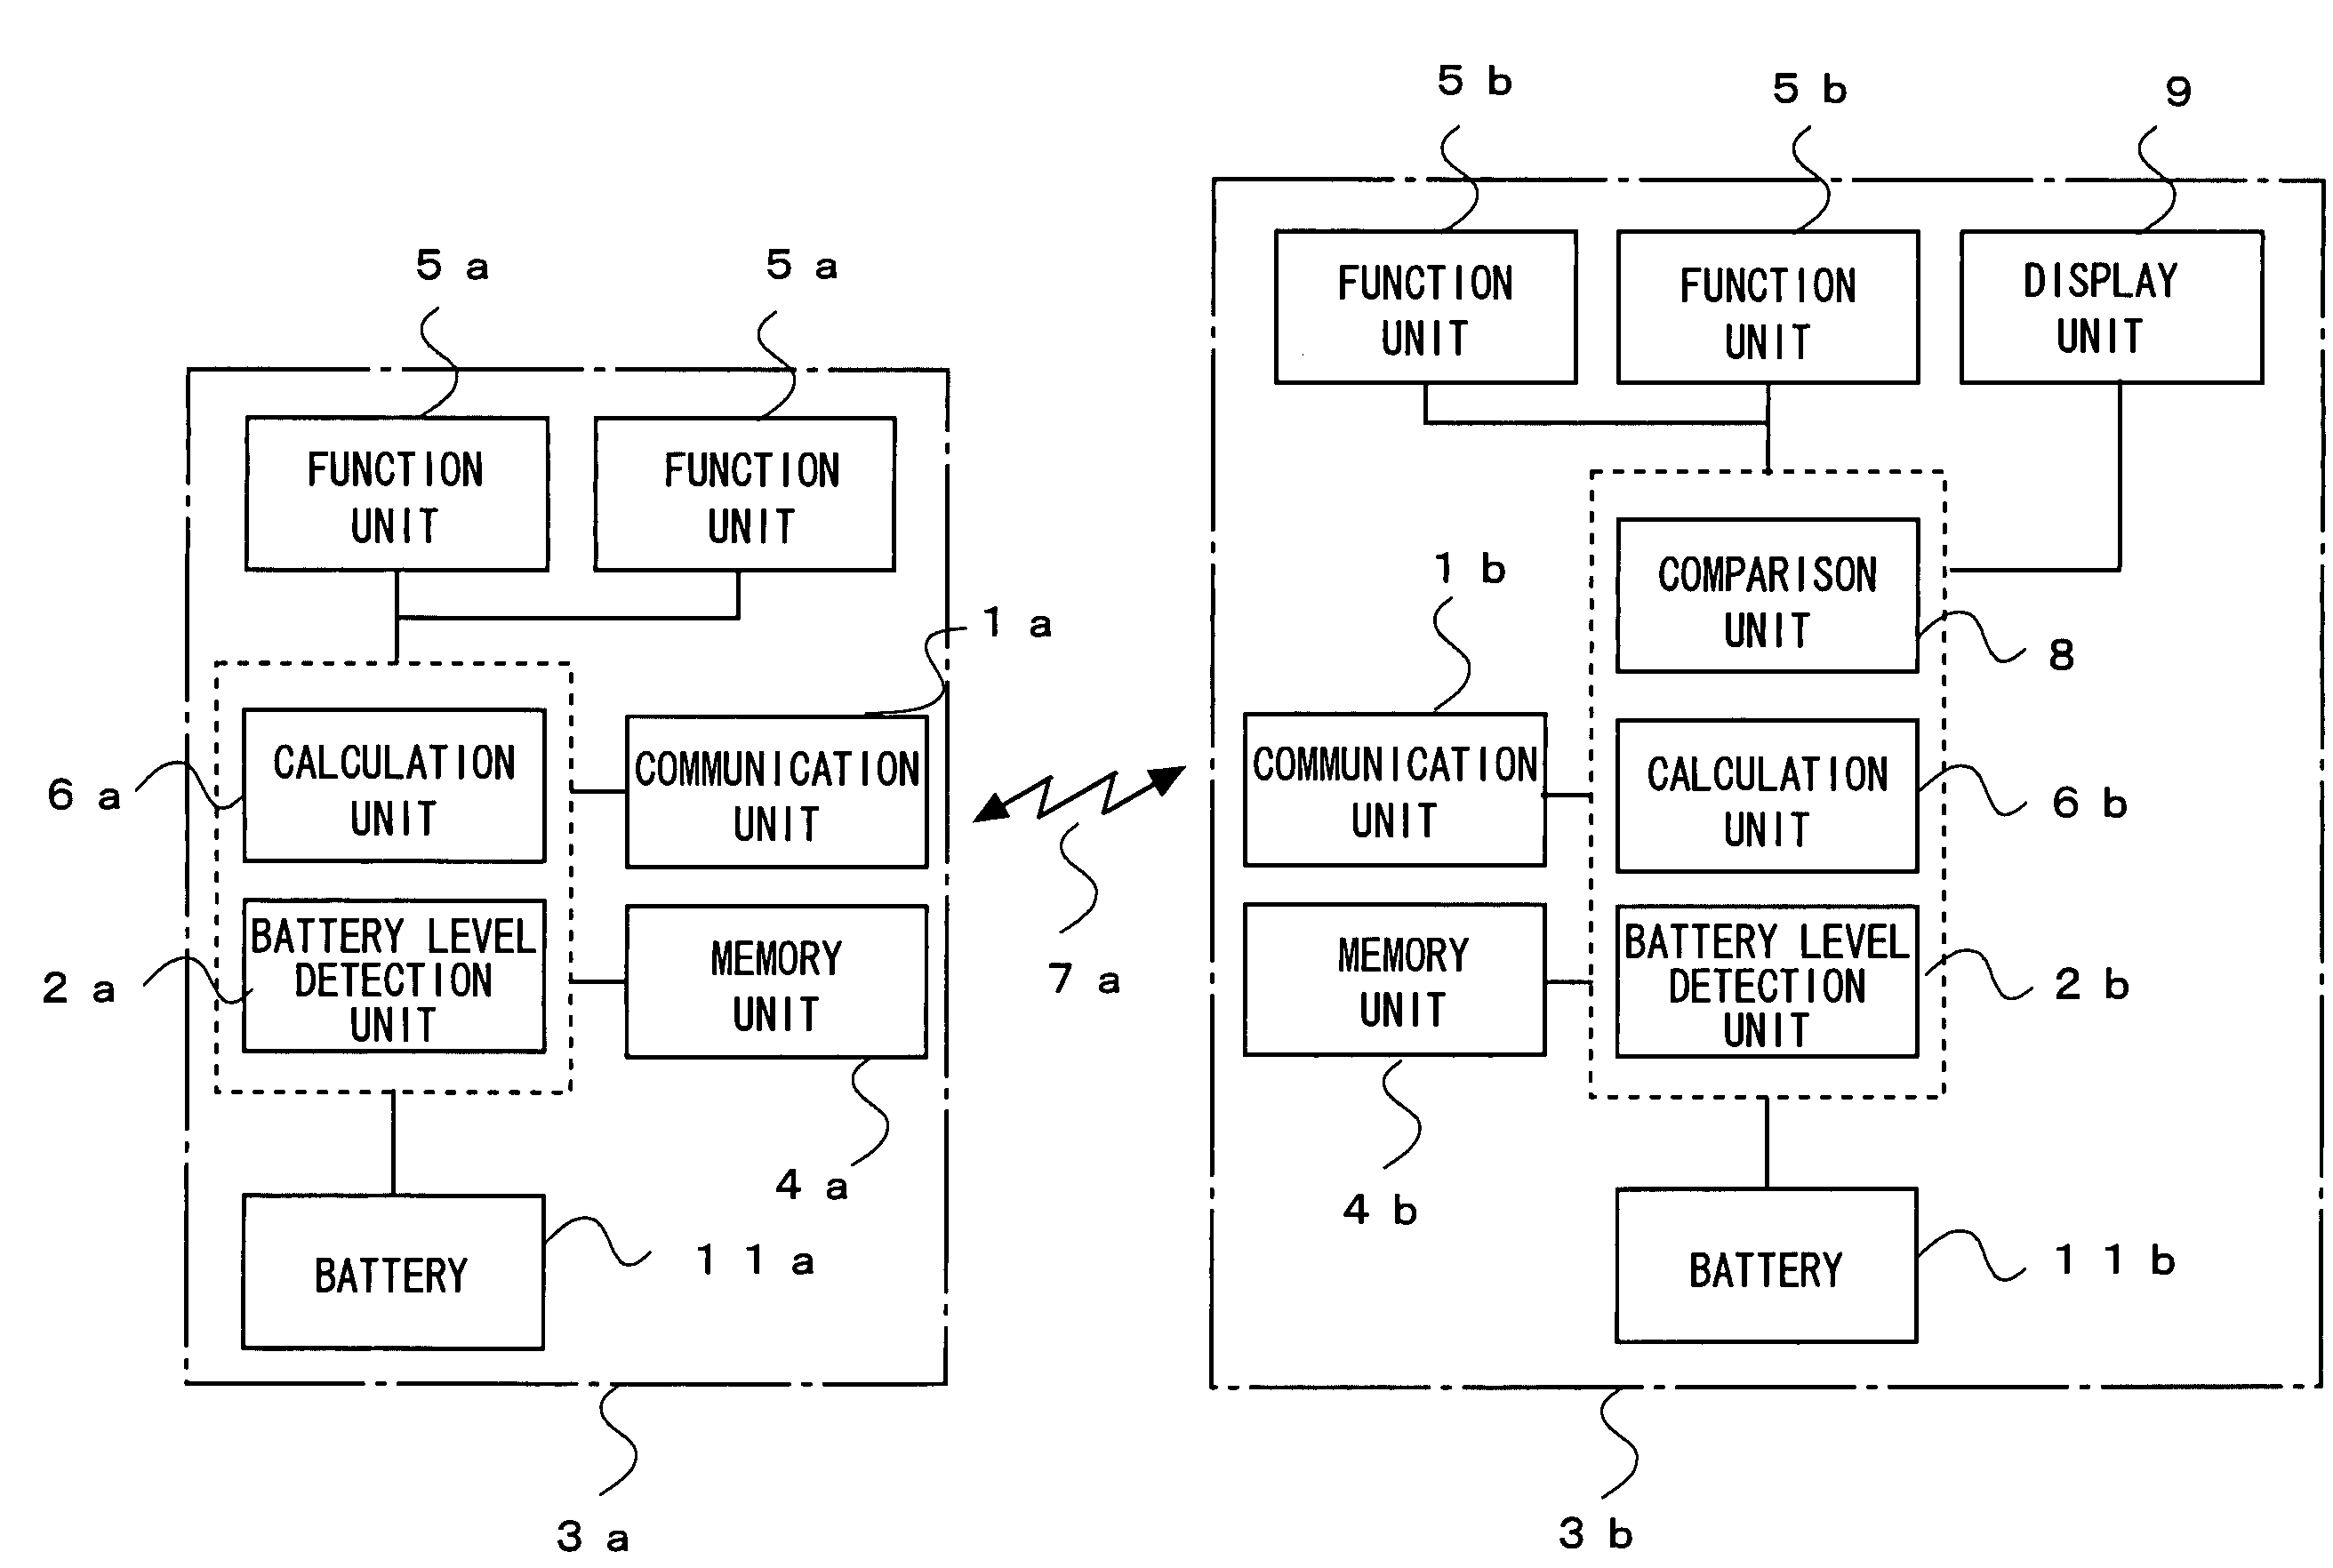 Small electronic device having battery level detection unit